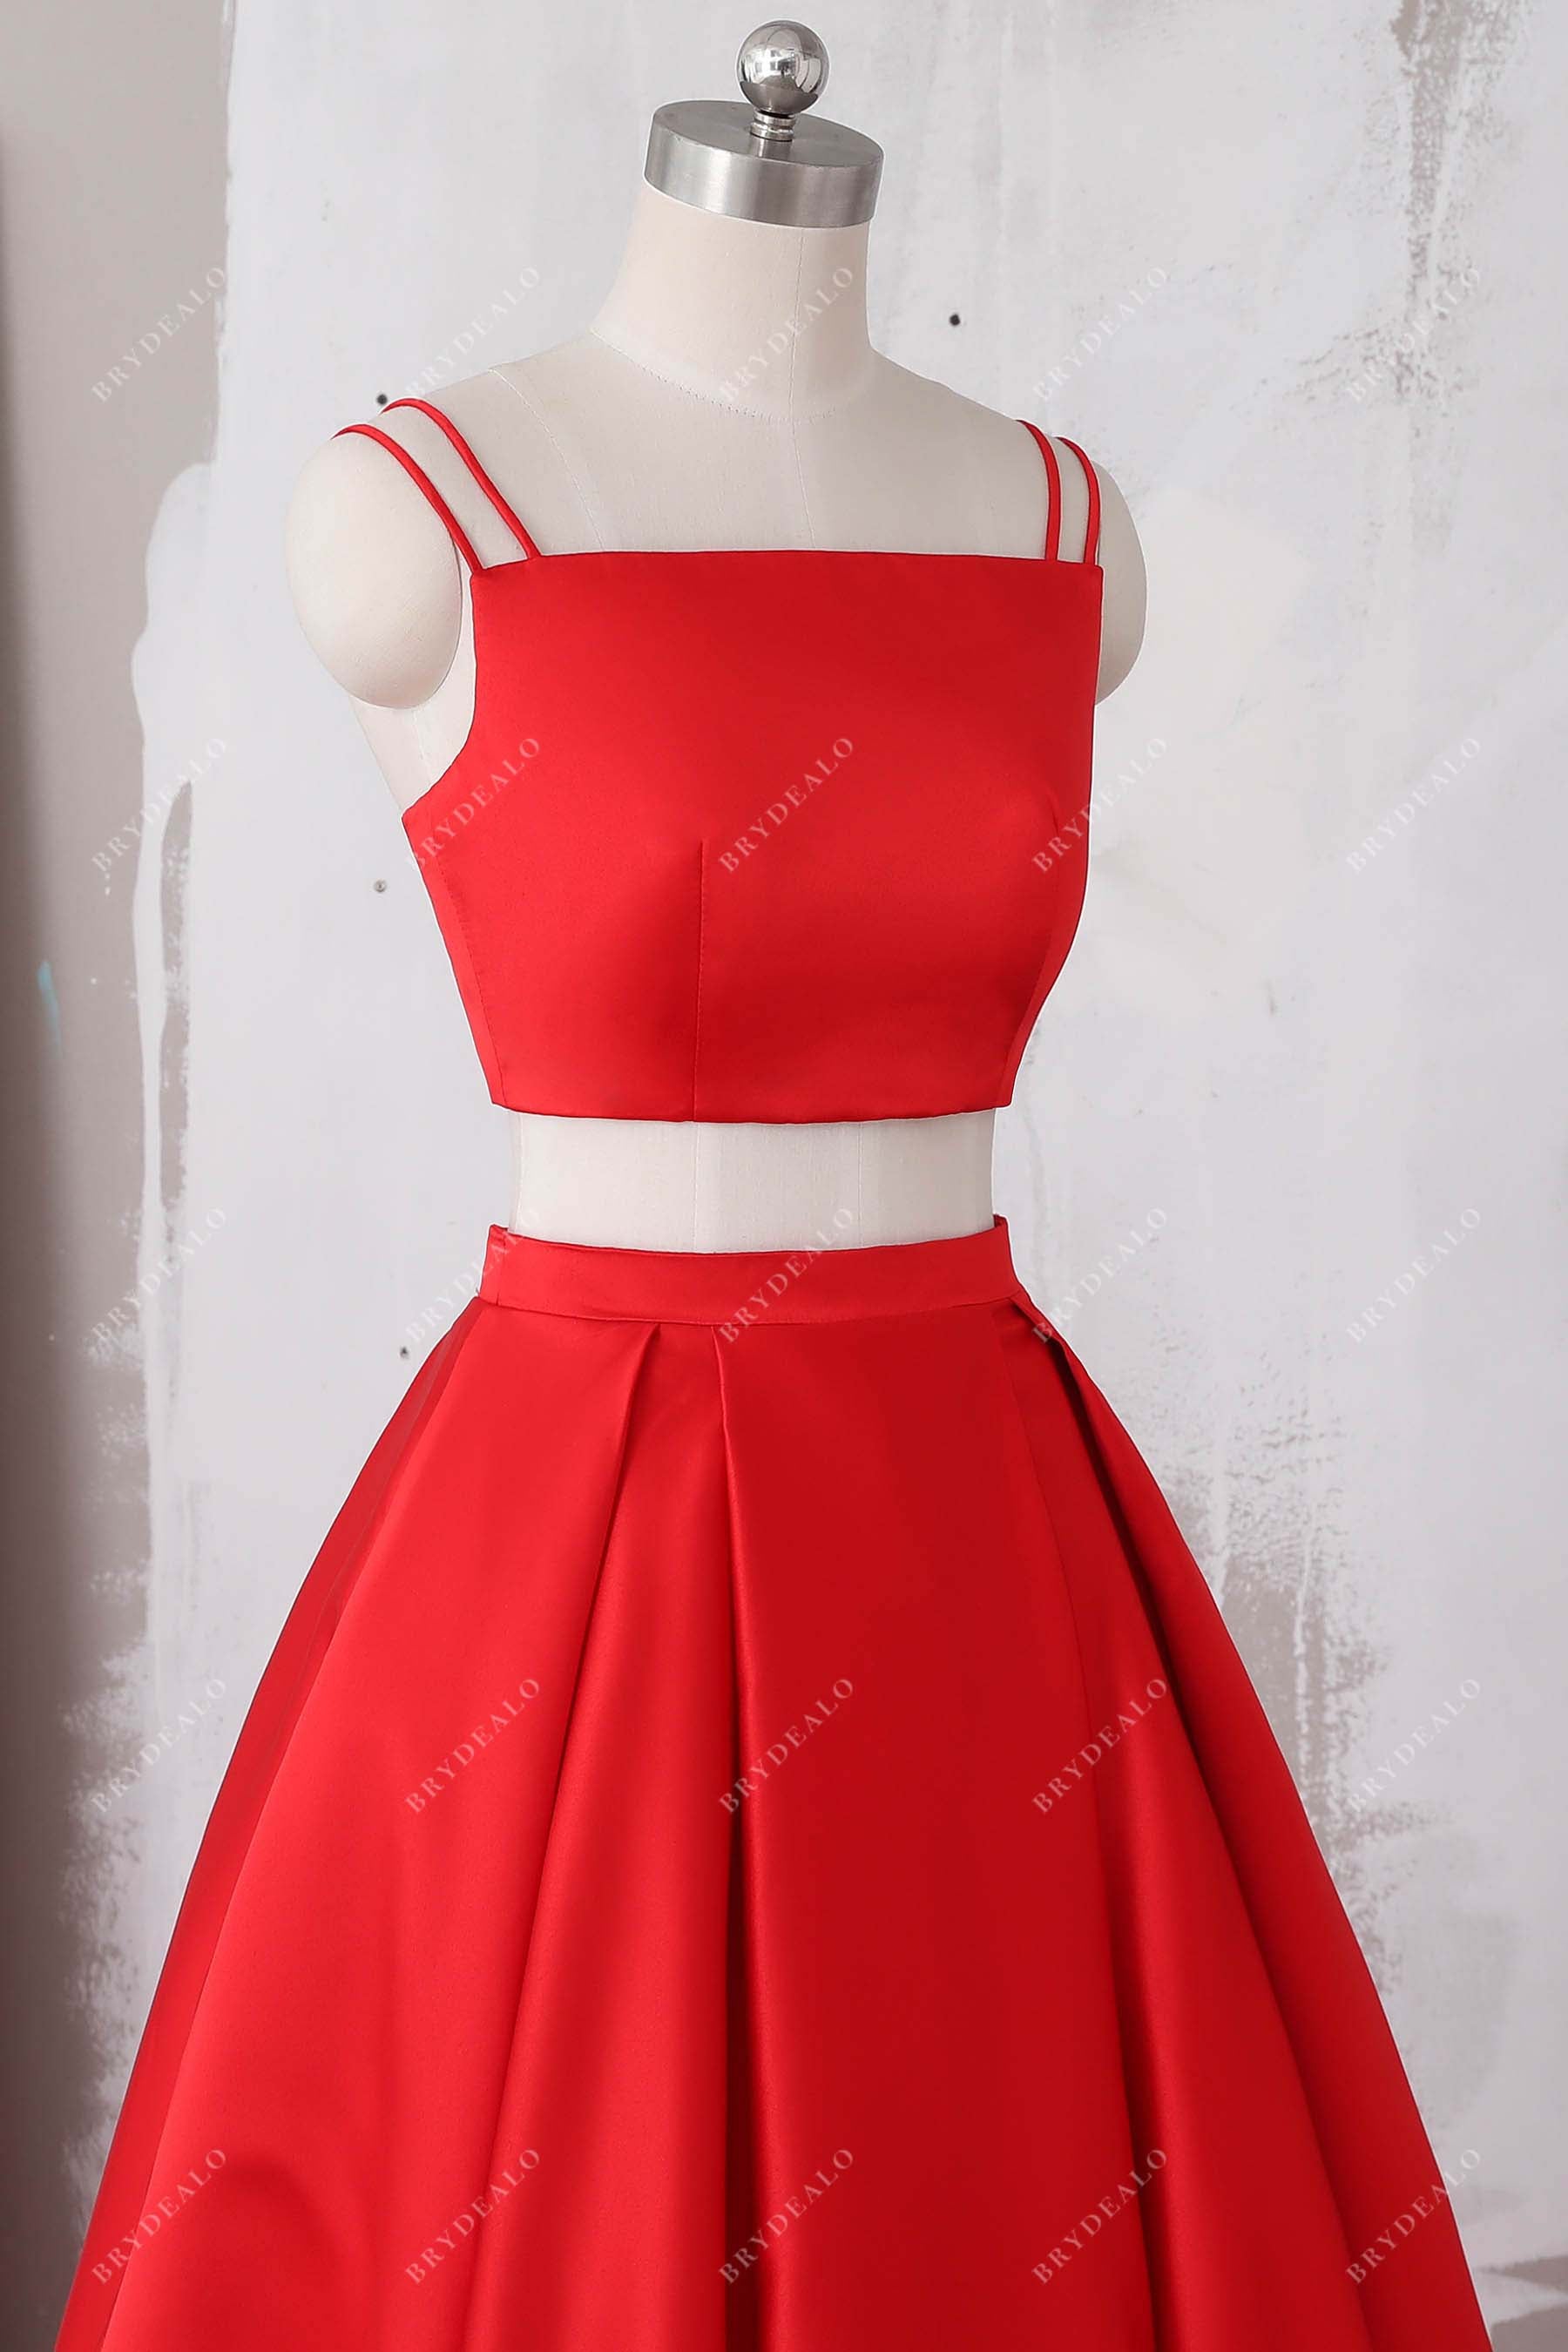 sleeveless red satin double straps crop top